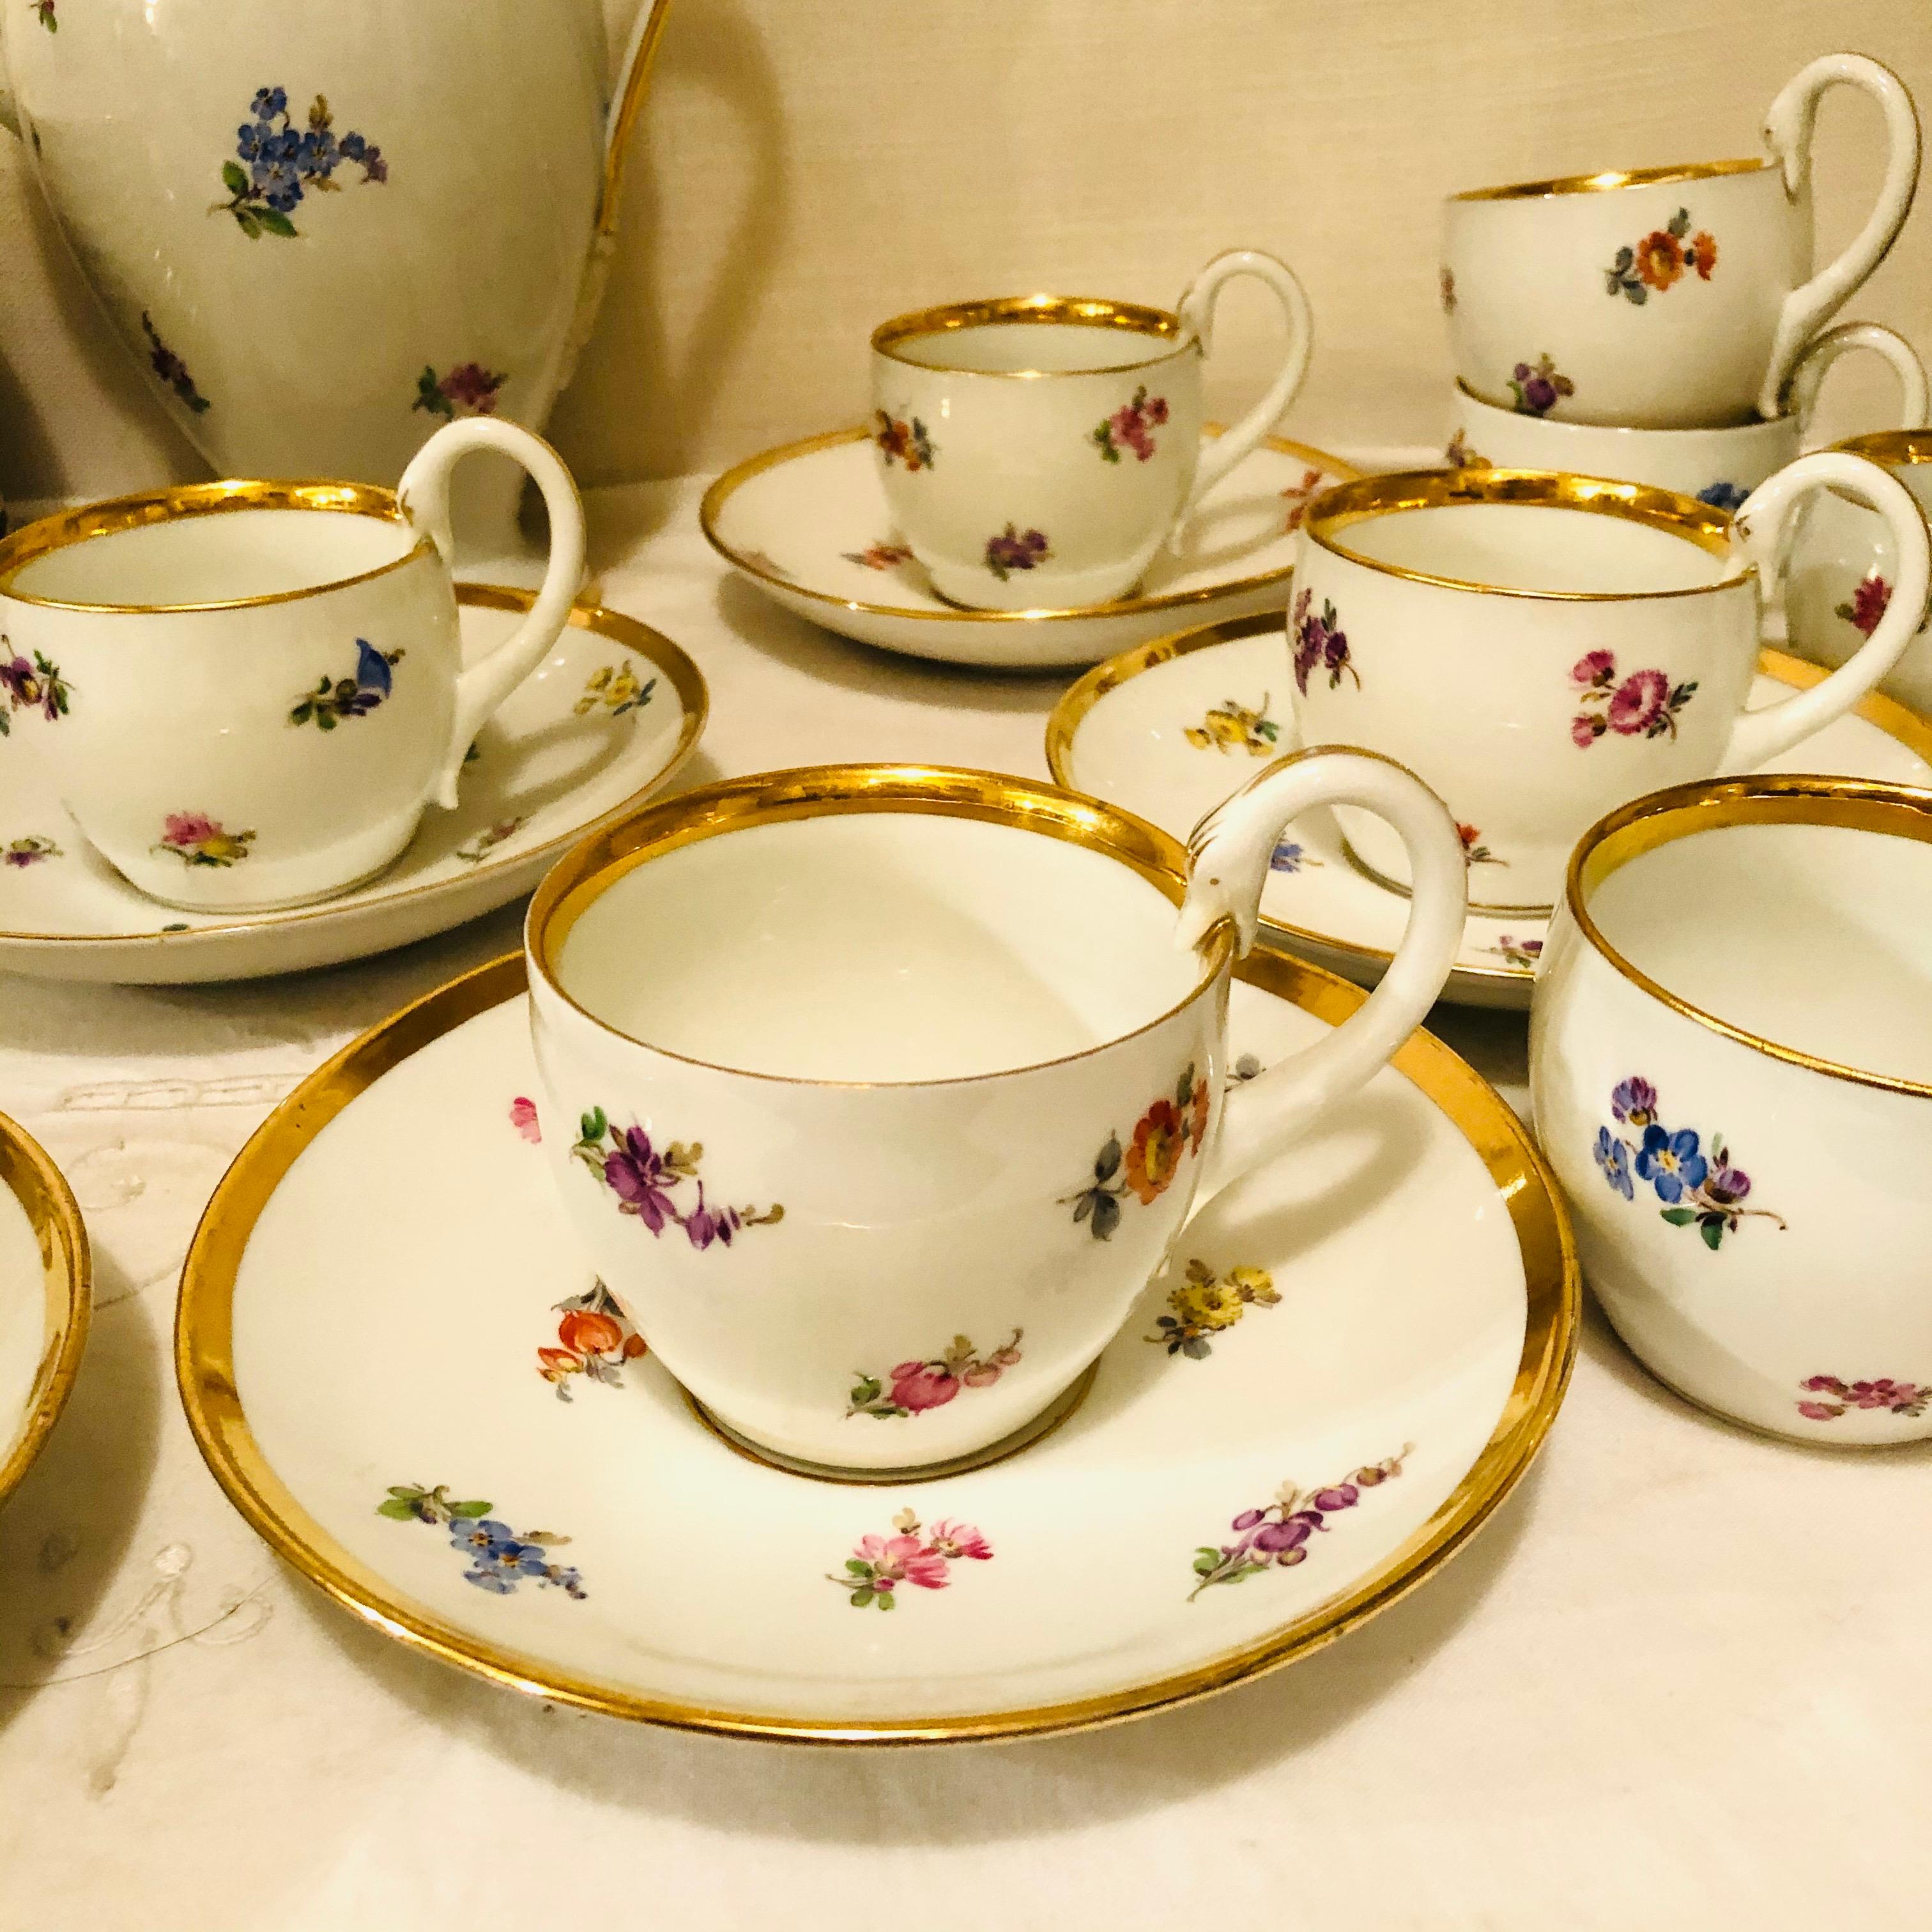 German Meissen Streublumen Tea Set for 10 with Cups and Saucers, Cake Plates and Teapot